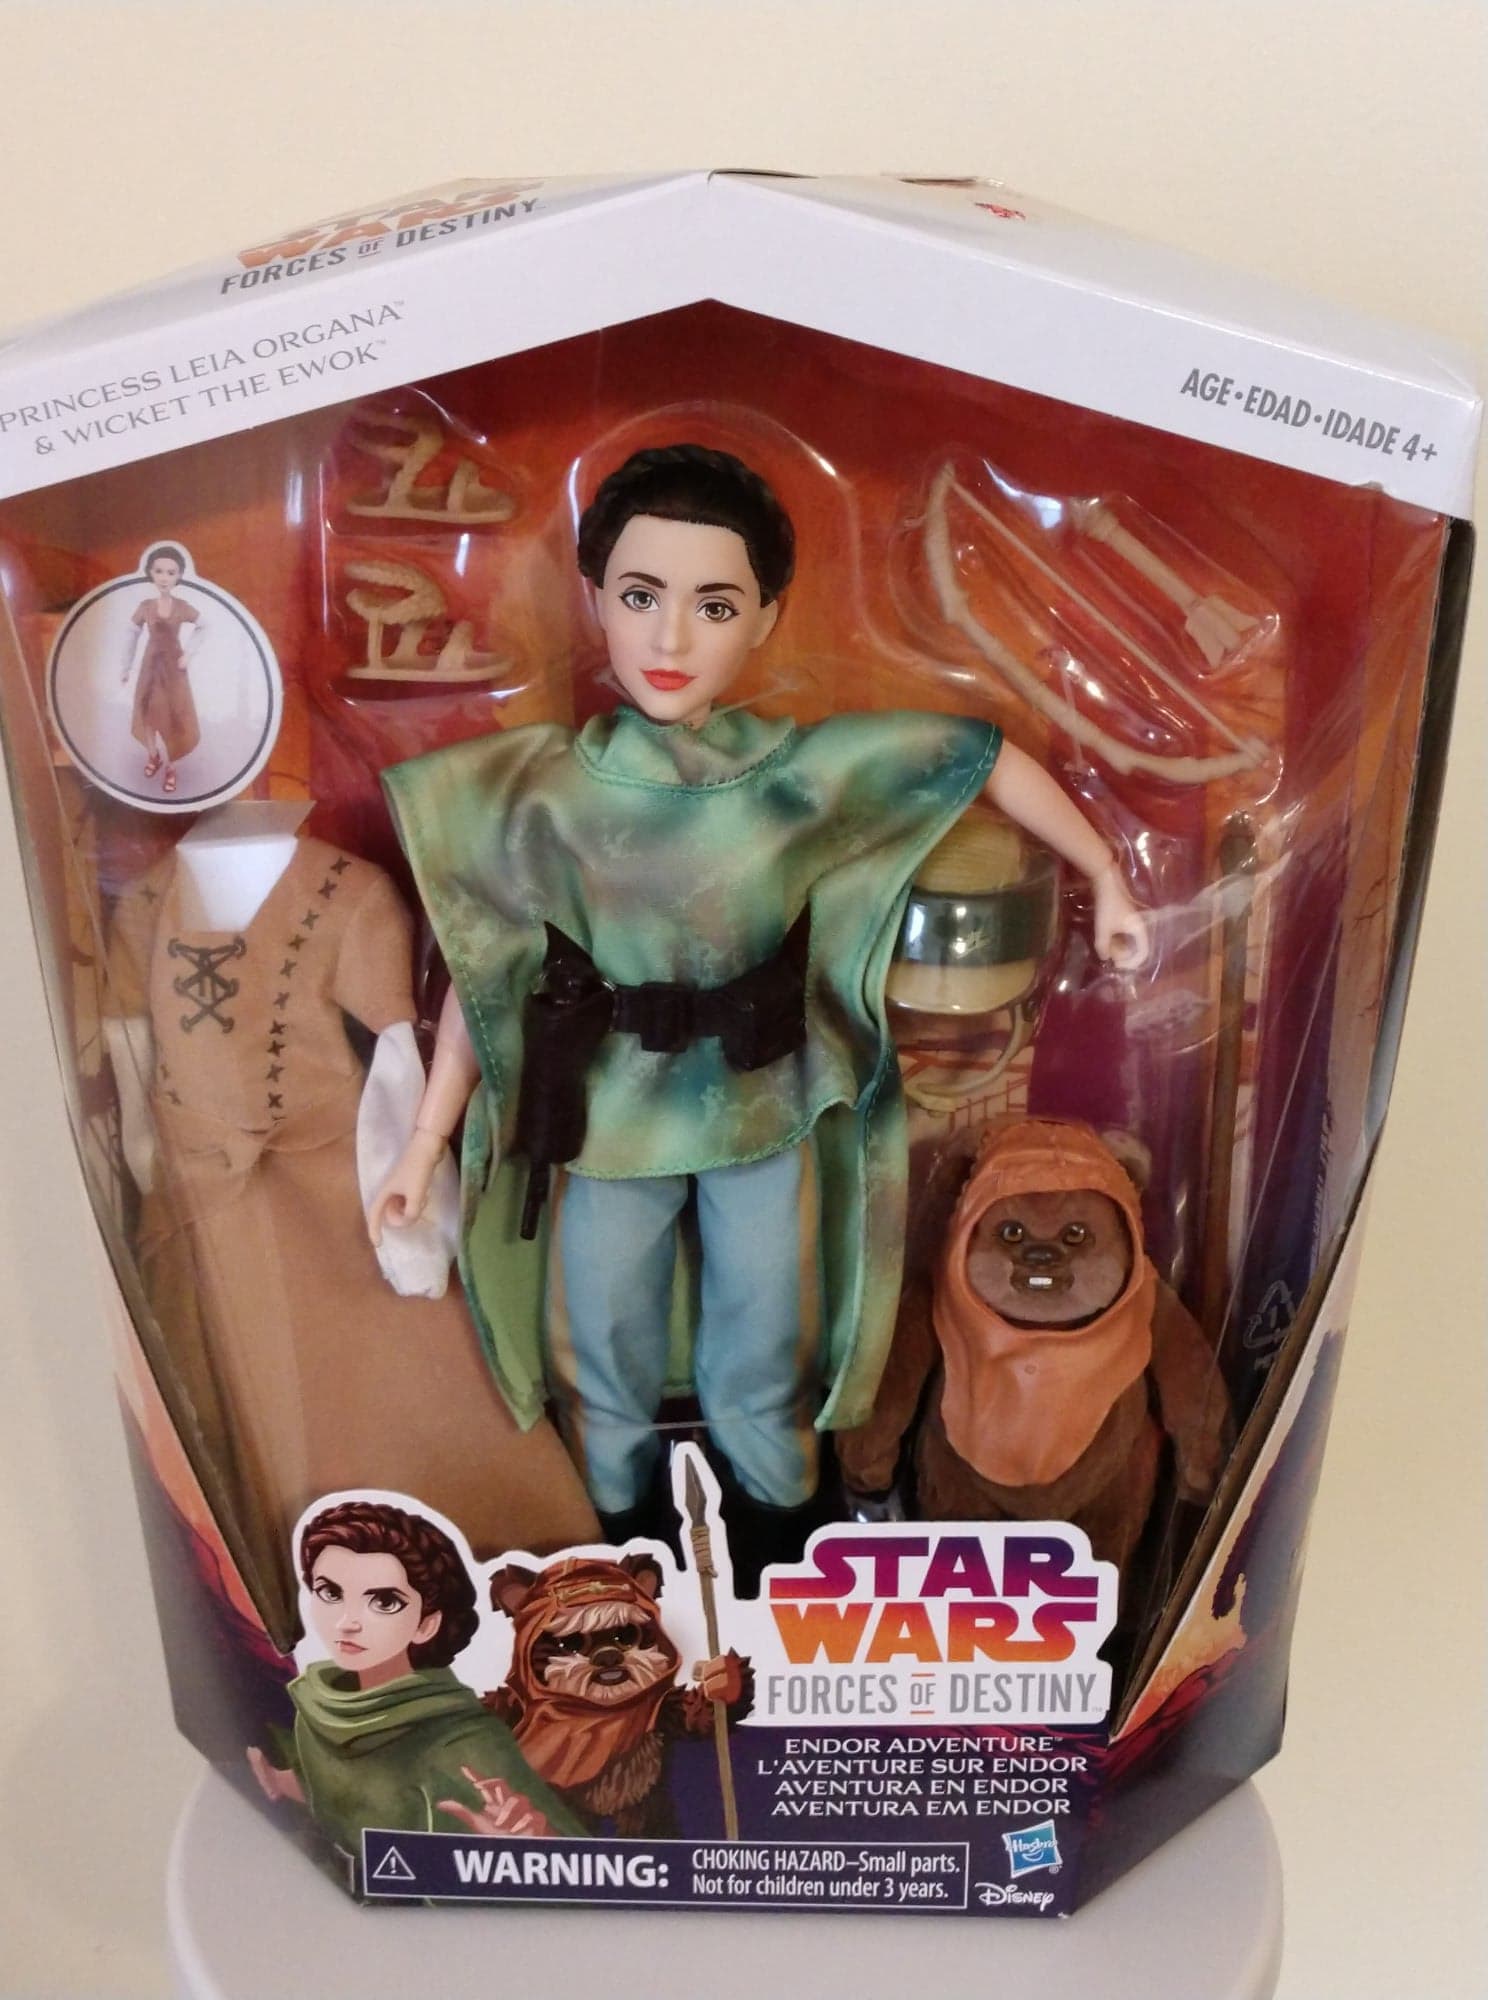 A look at the Star Wars Forces of Destiny: Endor Adventure toy